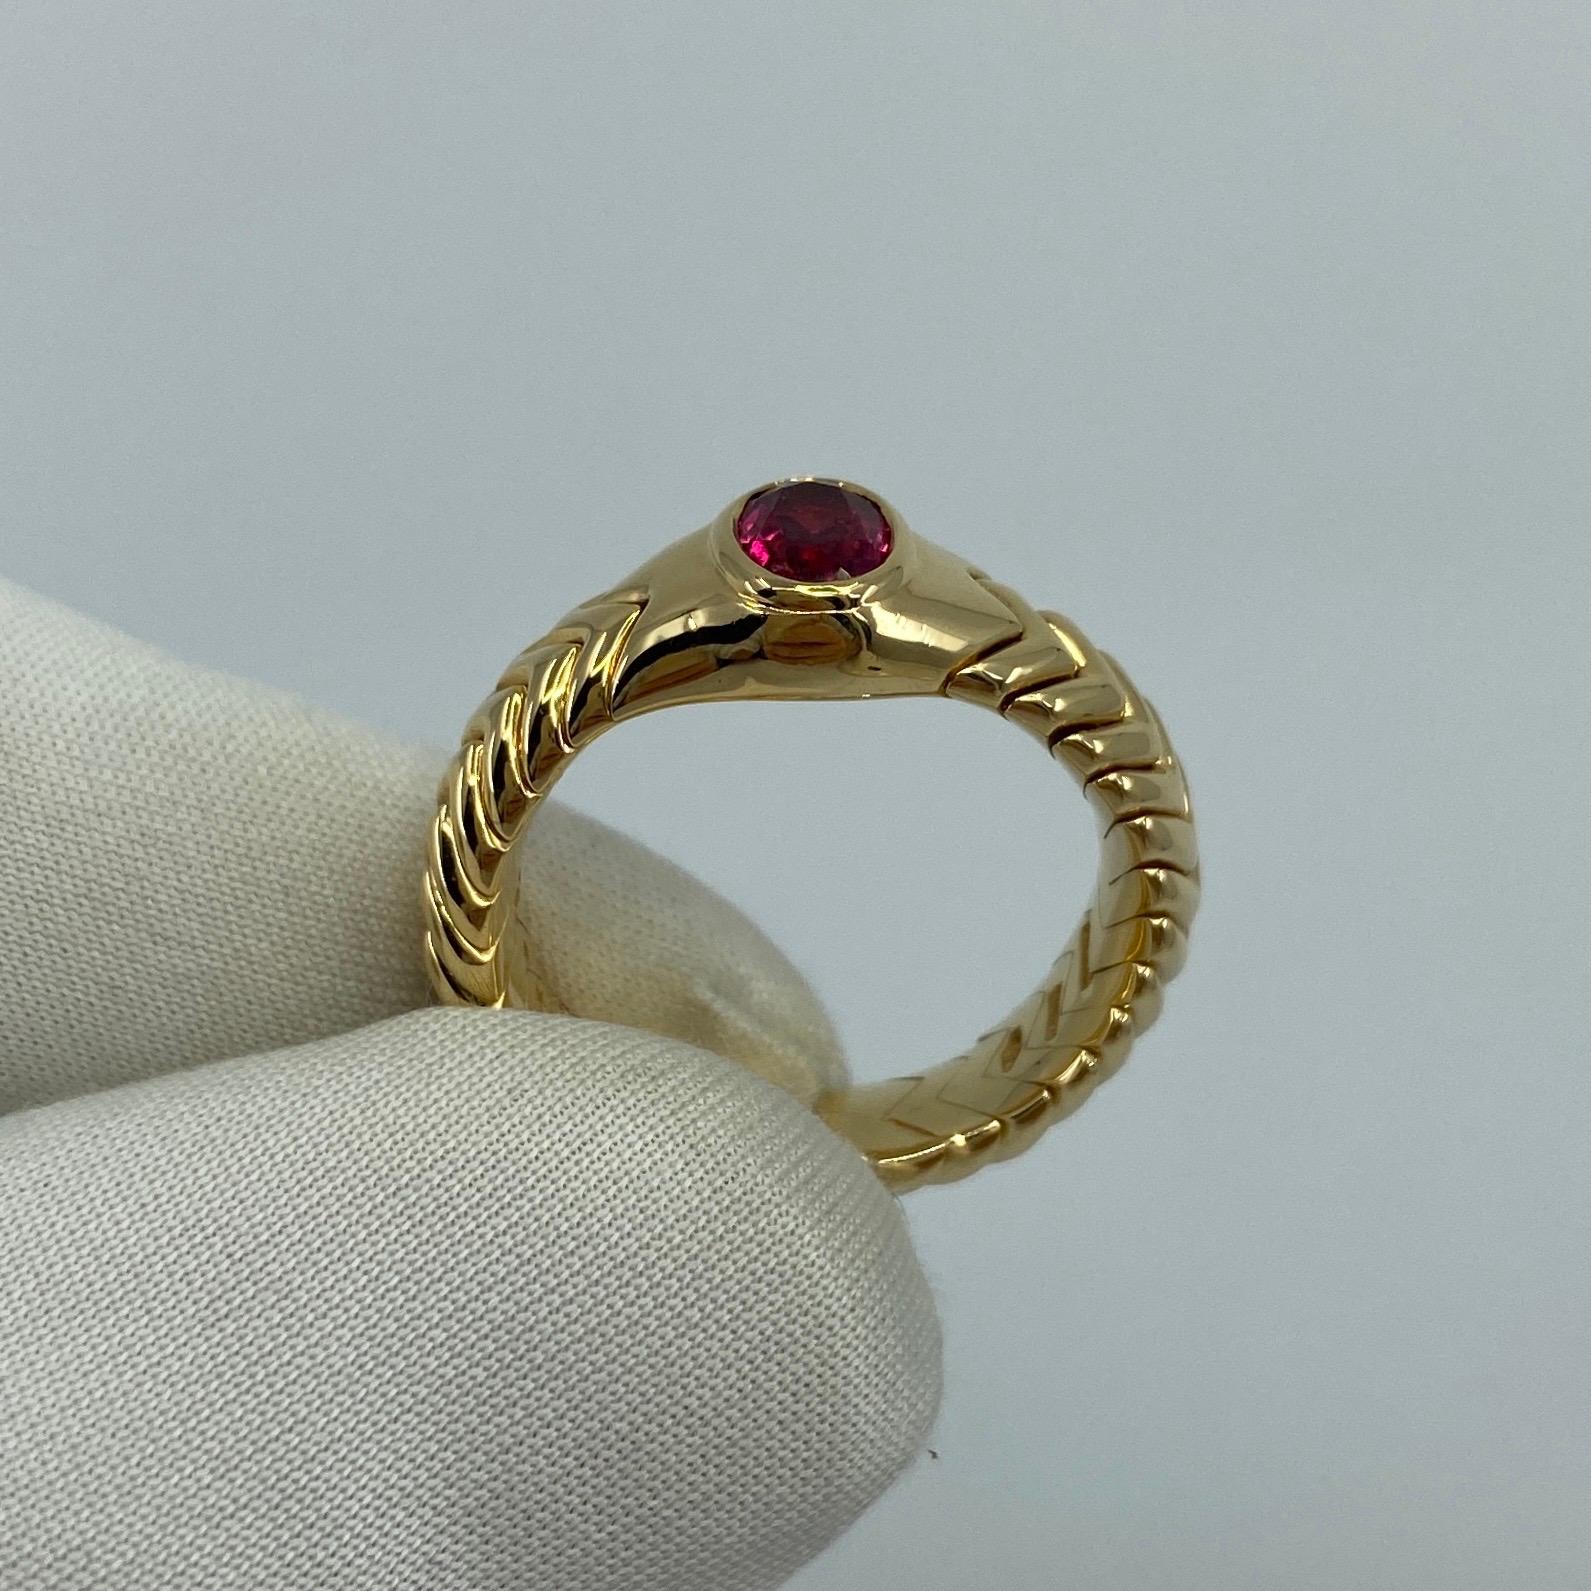 Rare Bvlgari Pink Tourmaline Serpenti 18k Yellow Gold Ring.

The classic Bulgari snake theme, this 18K yellow gold ring comfortably wraps around your finger with a flexible design.
The ring is set with a beautiful oval cut natural vivid pink